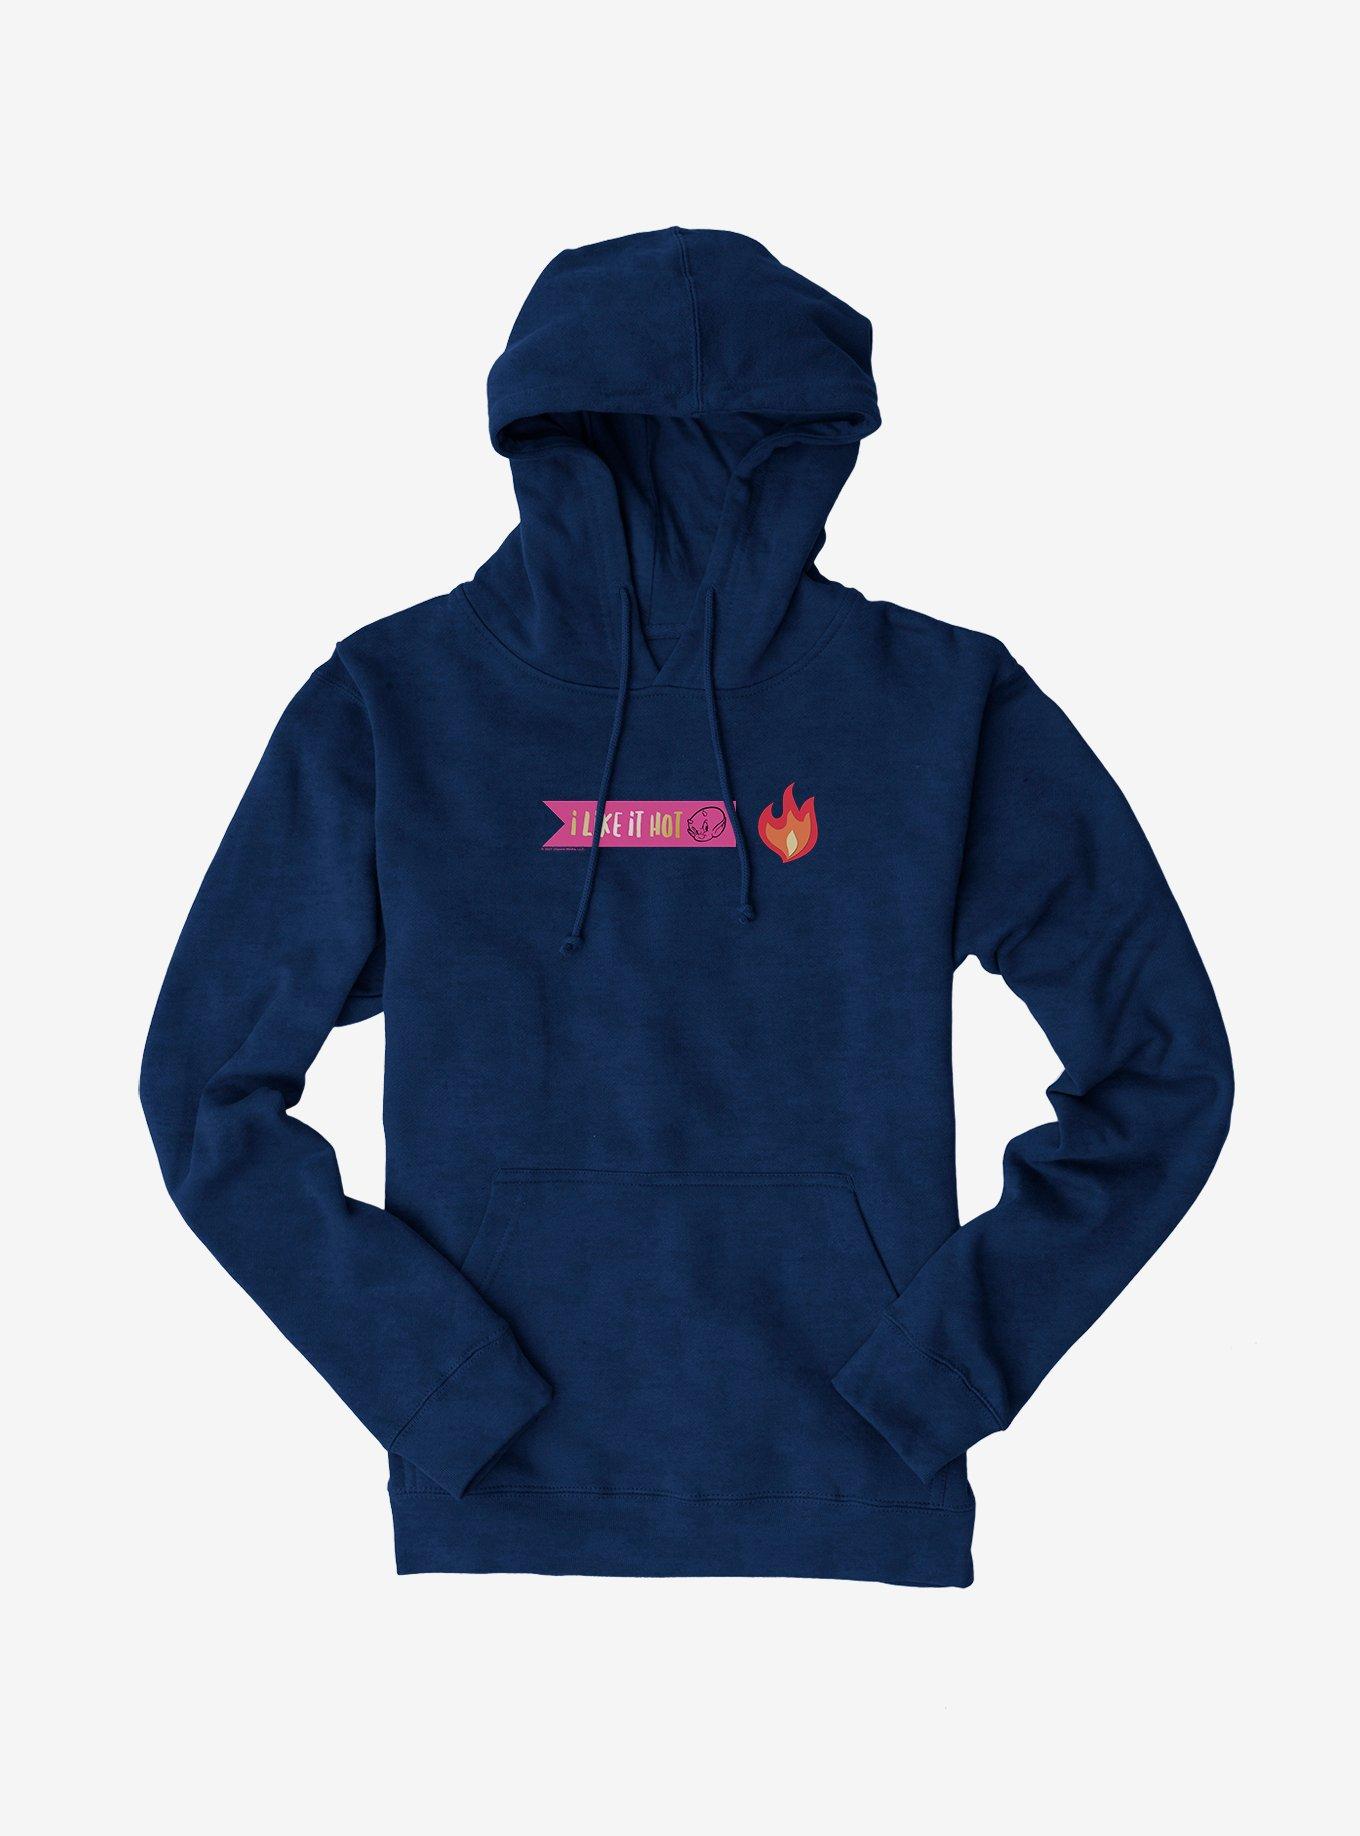 Hot Stuff The Hotter The Better Hoodie, , hi-res